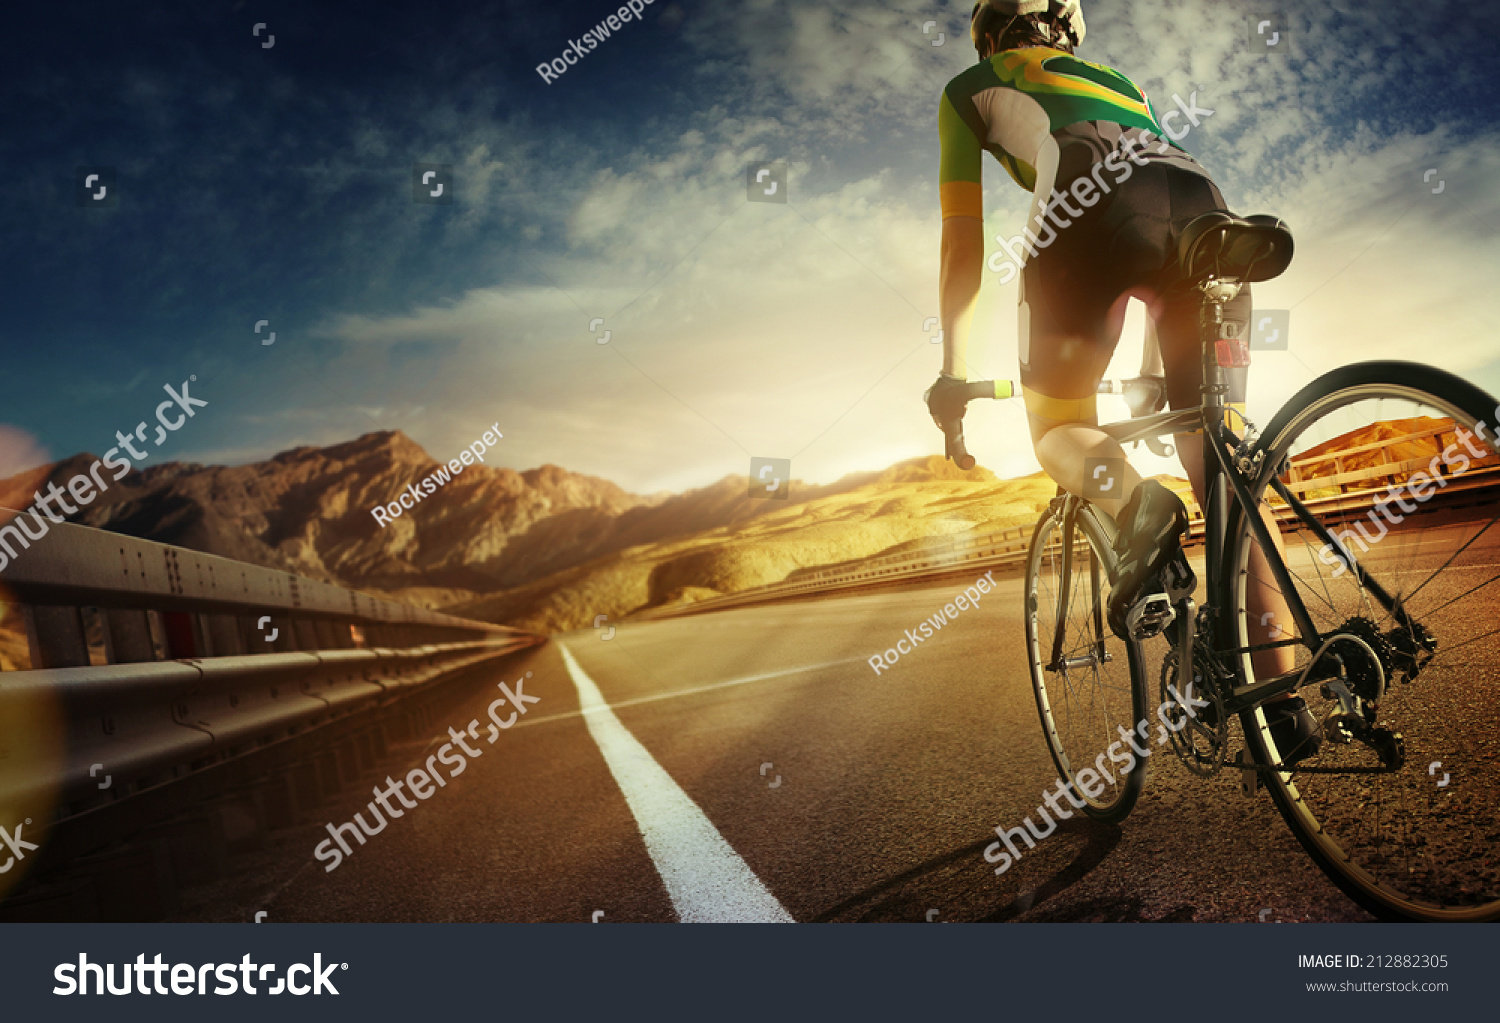 Cyclist riding a bike on an open road to the sunset  #212882305